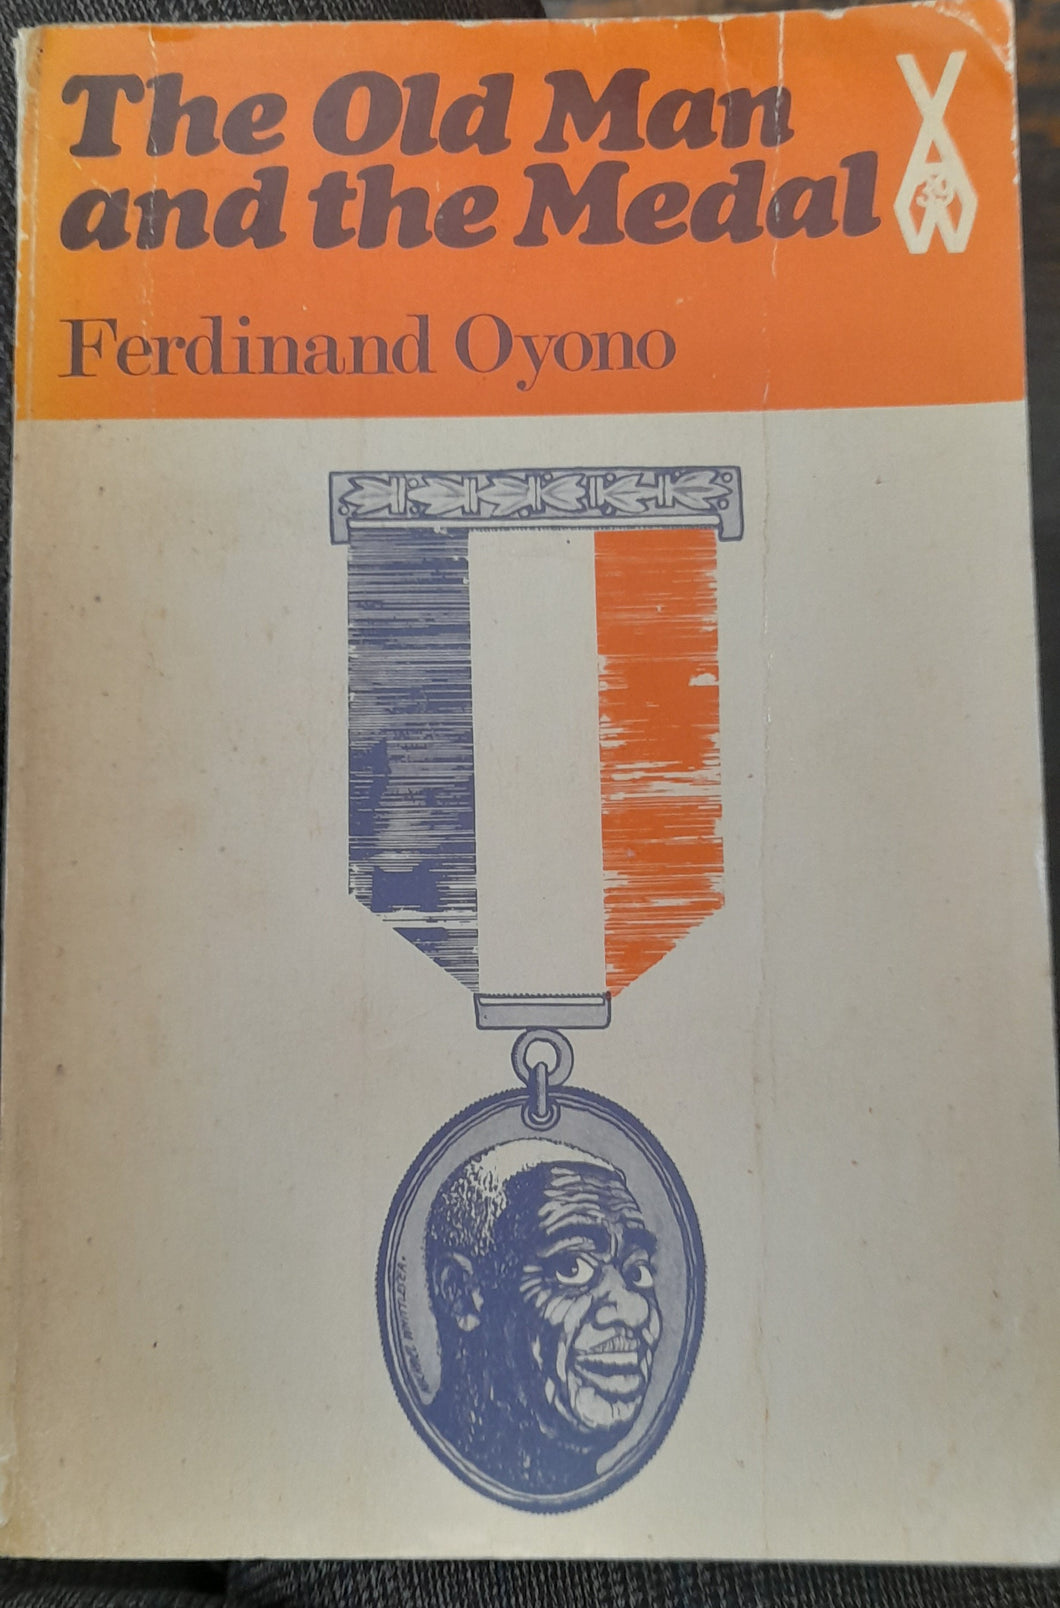 Ferdinand Oyono -The old Man and the Medal